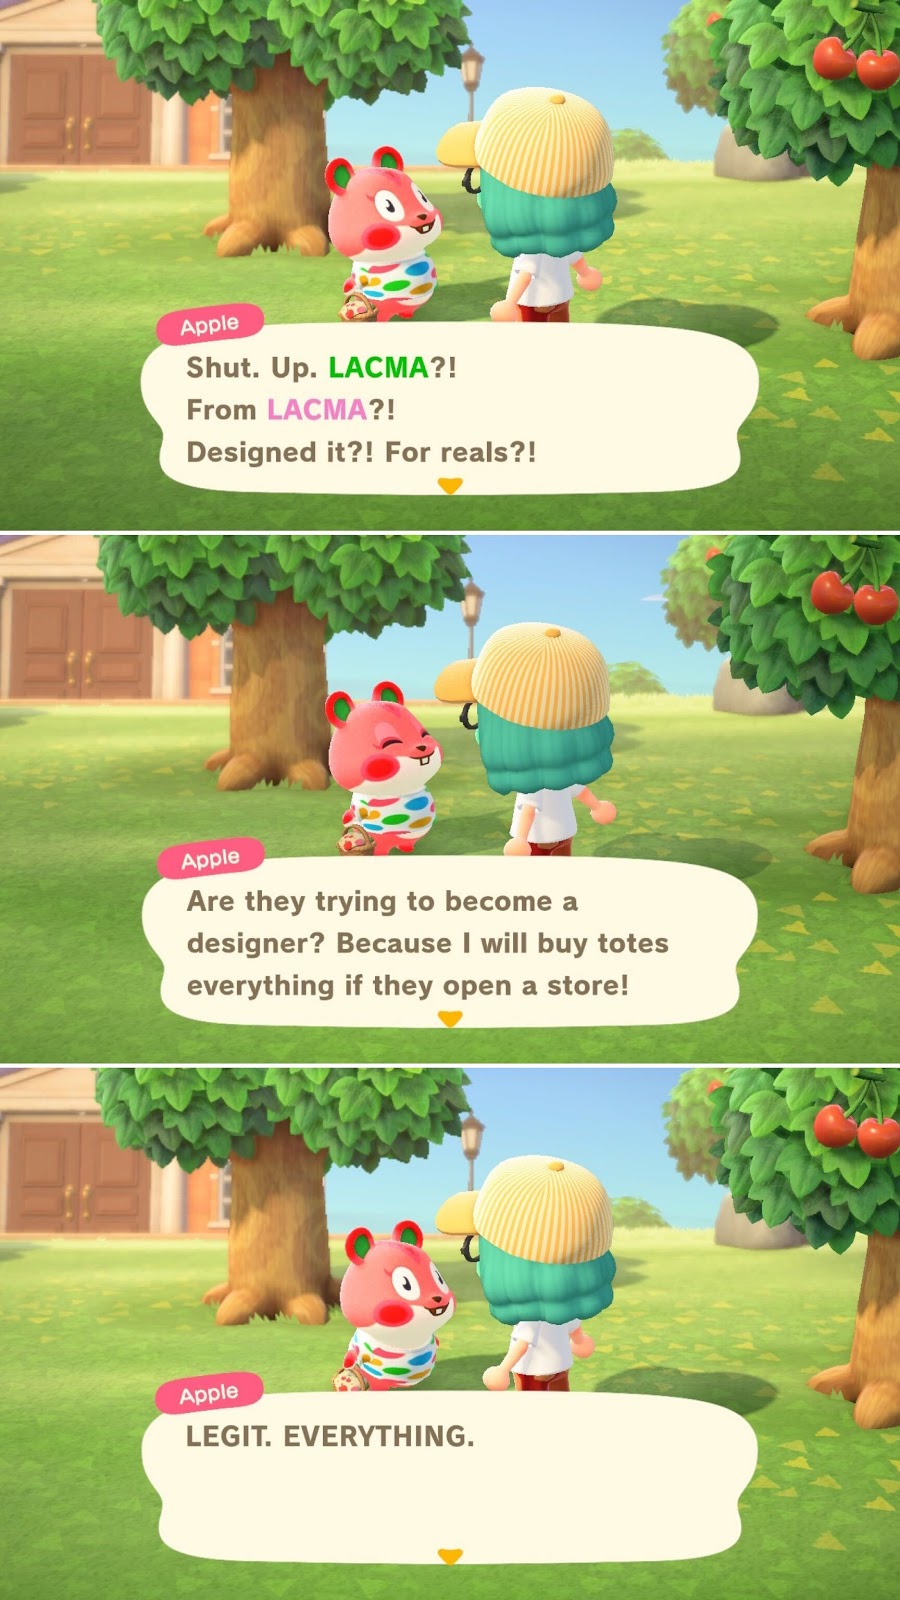 Interaction between two players in Animal Crossing